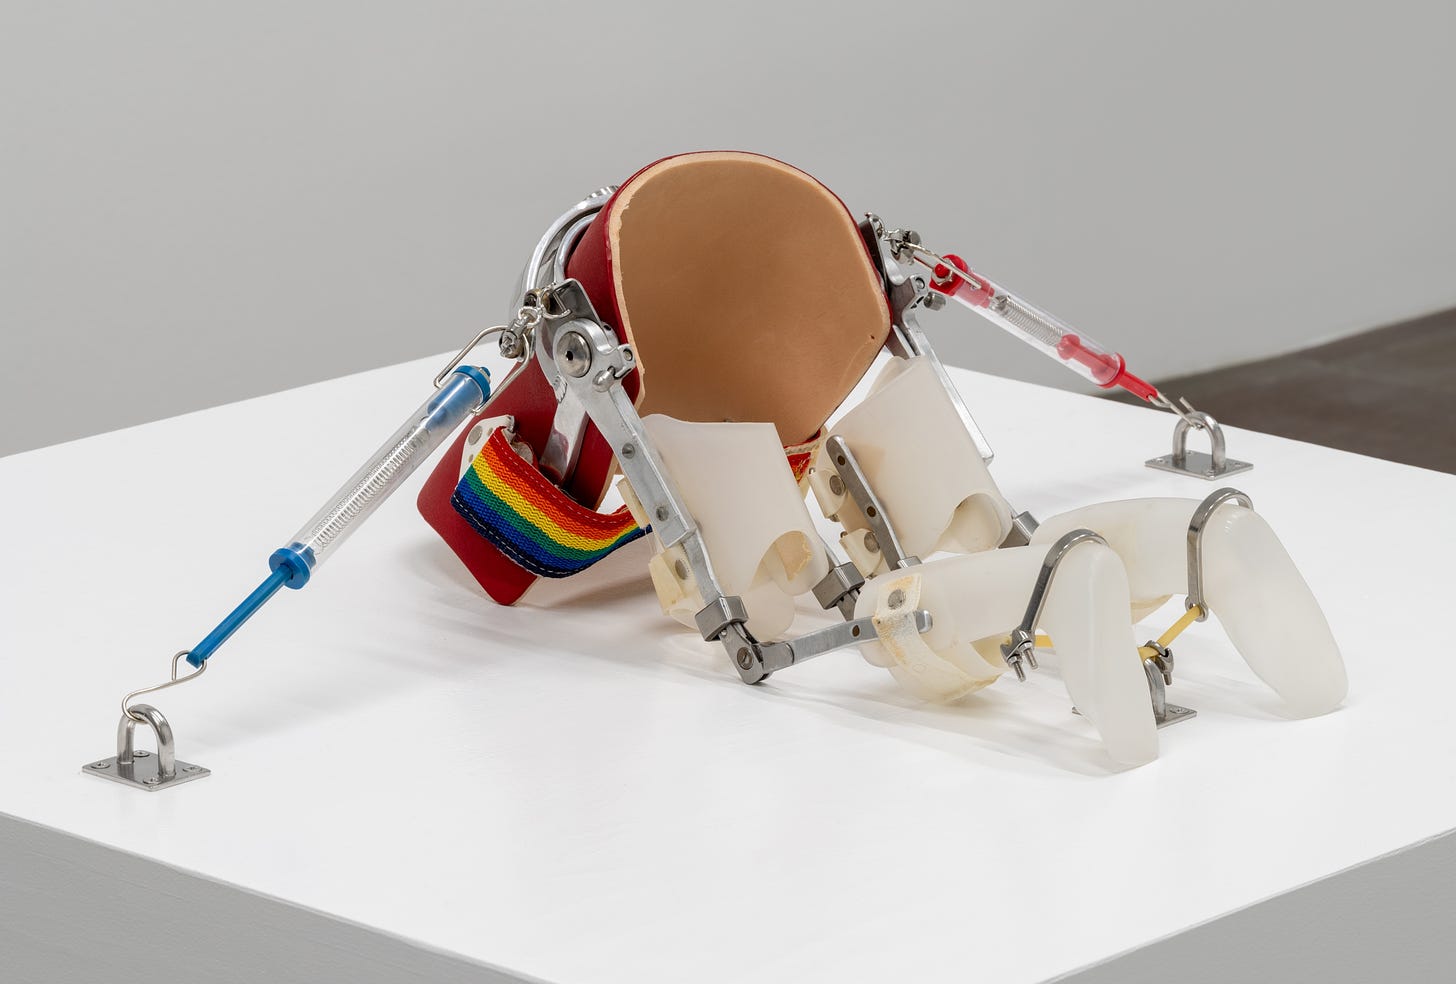 A photograph of a sculpture installed on a white plinth in a gallery. A body is formed by negative space. Miniature leg braces form 2 legs, attached to a back brace pointed downward so it looks like the body is kneeling and the upper half is missing or disappears into the plinth. A blue and a red syringe-like gauge form the arms, hooked on metal hooks mounted to the base. There is a stretchy rainbow strap that would cross the belly.